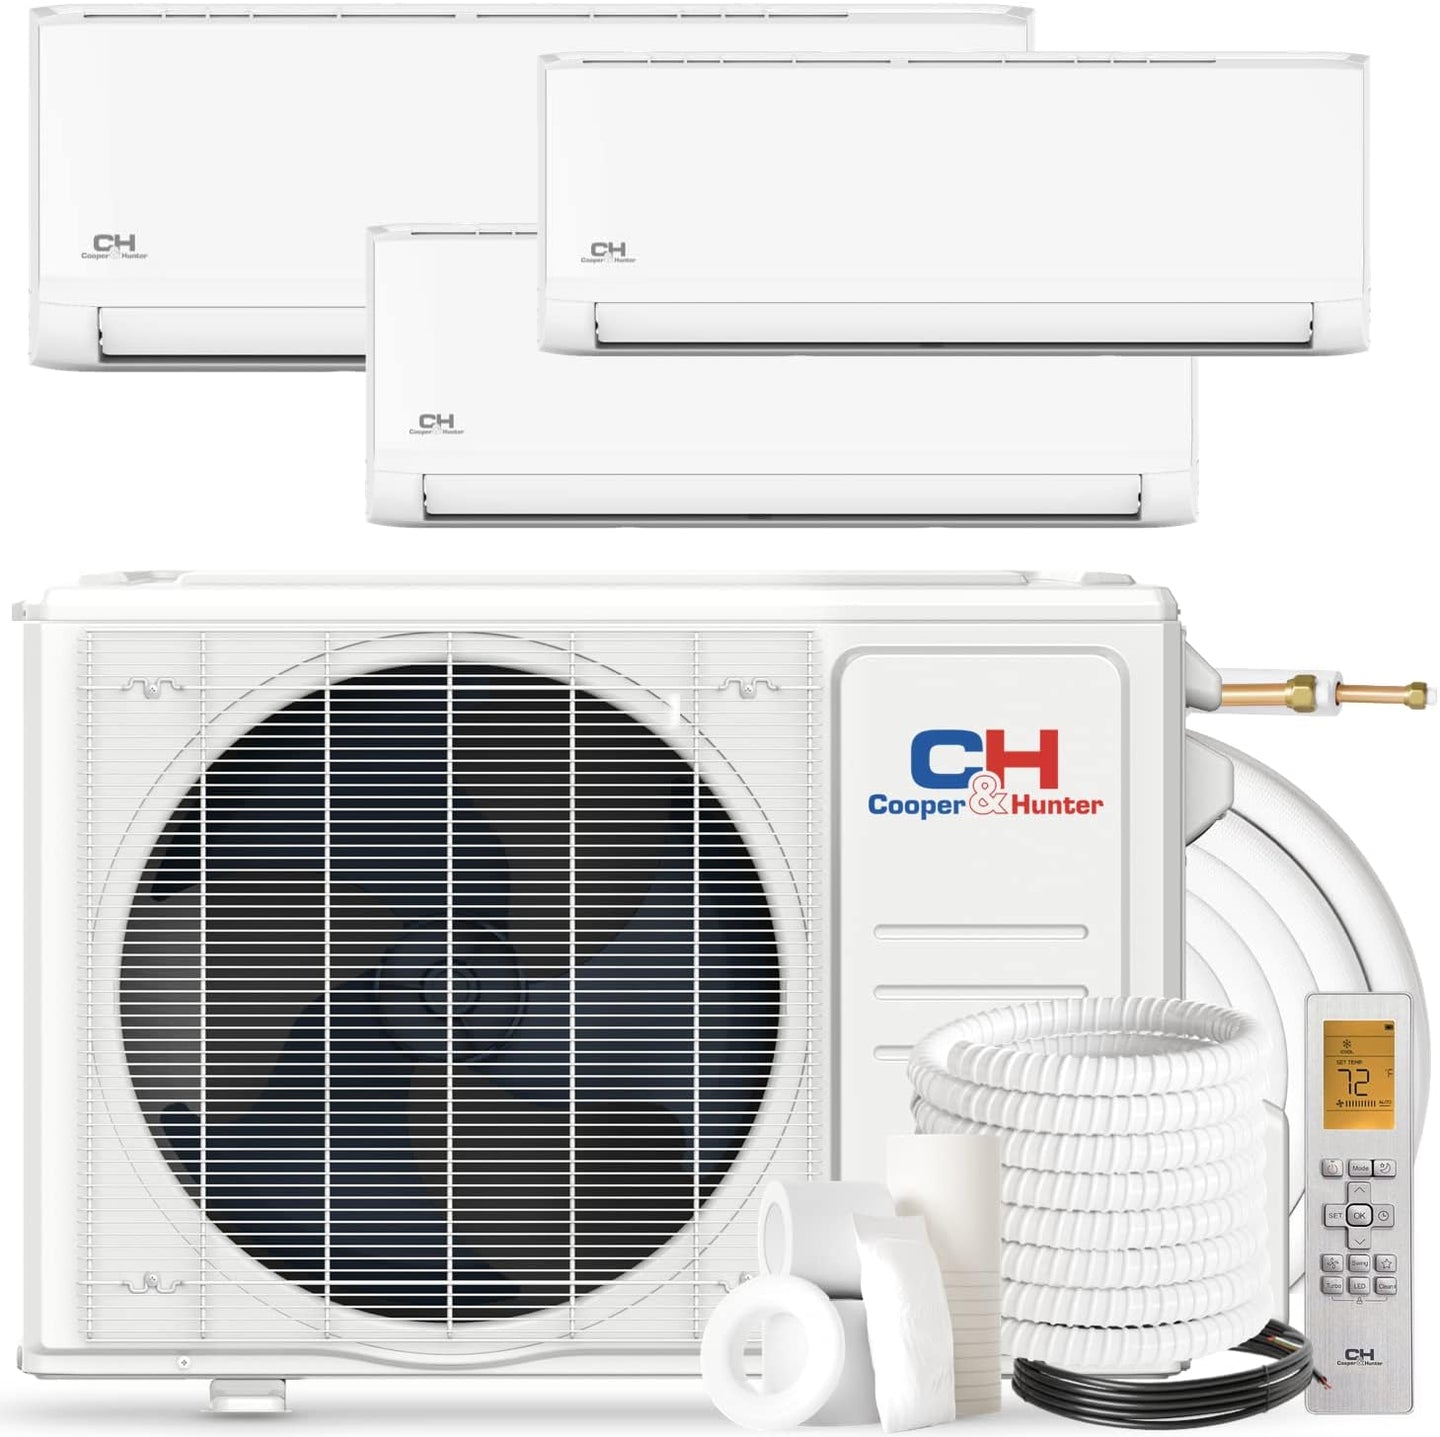 Cooper & Hunter OLIVIA Series Tri 3 Zone 6000 9000 9000 BTU 23.8 SEER Multi Zone Ductless Mini Split Air Conditioner and Heater Full Set with 25ft Installation Kits